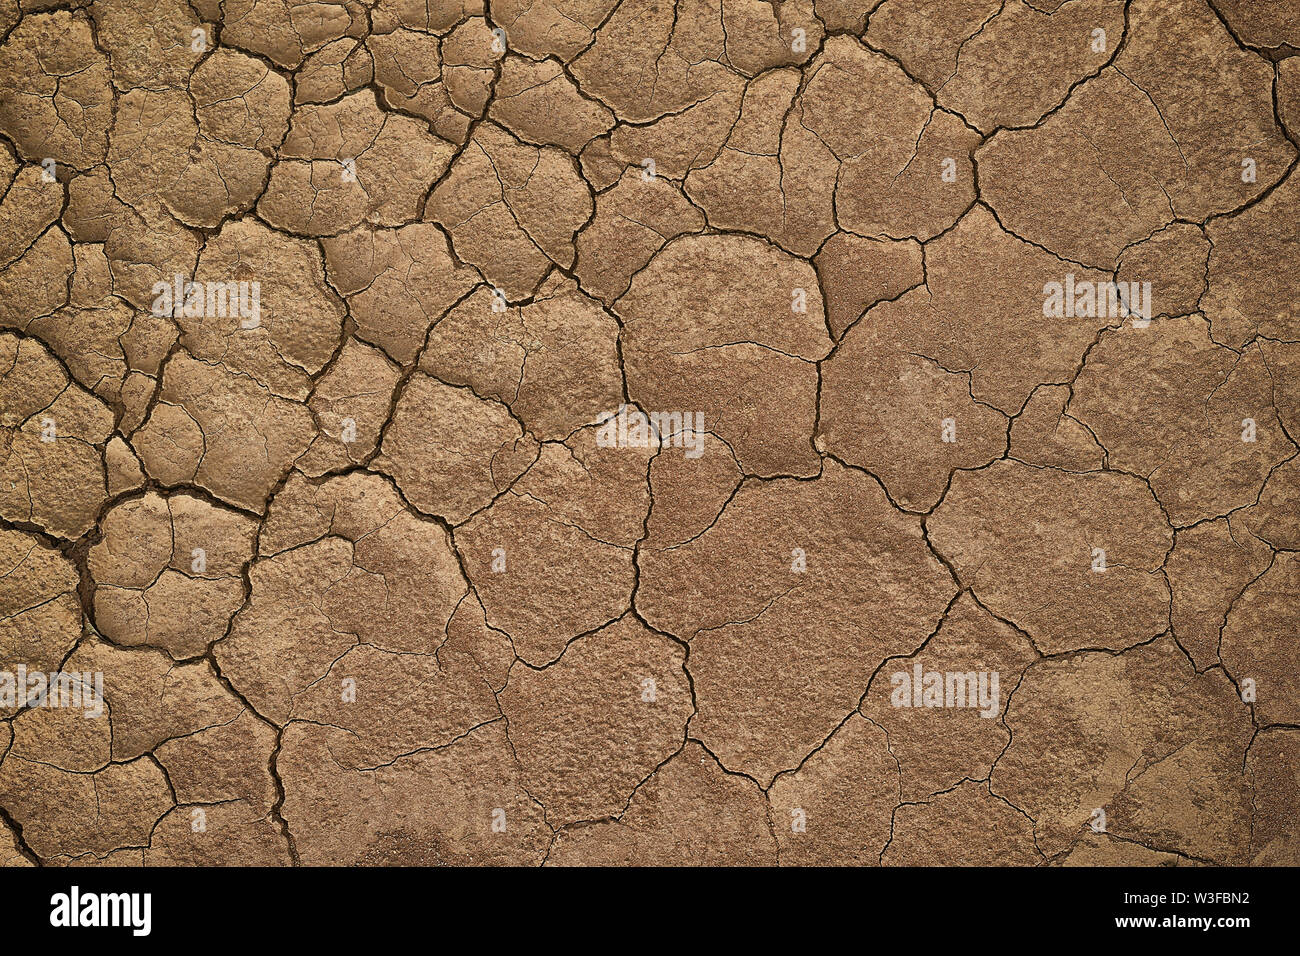 Dry cracked earth during in a rainy season because lack of rain shortage of water cracked soil texture Stock Photo